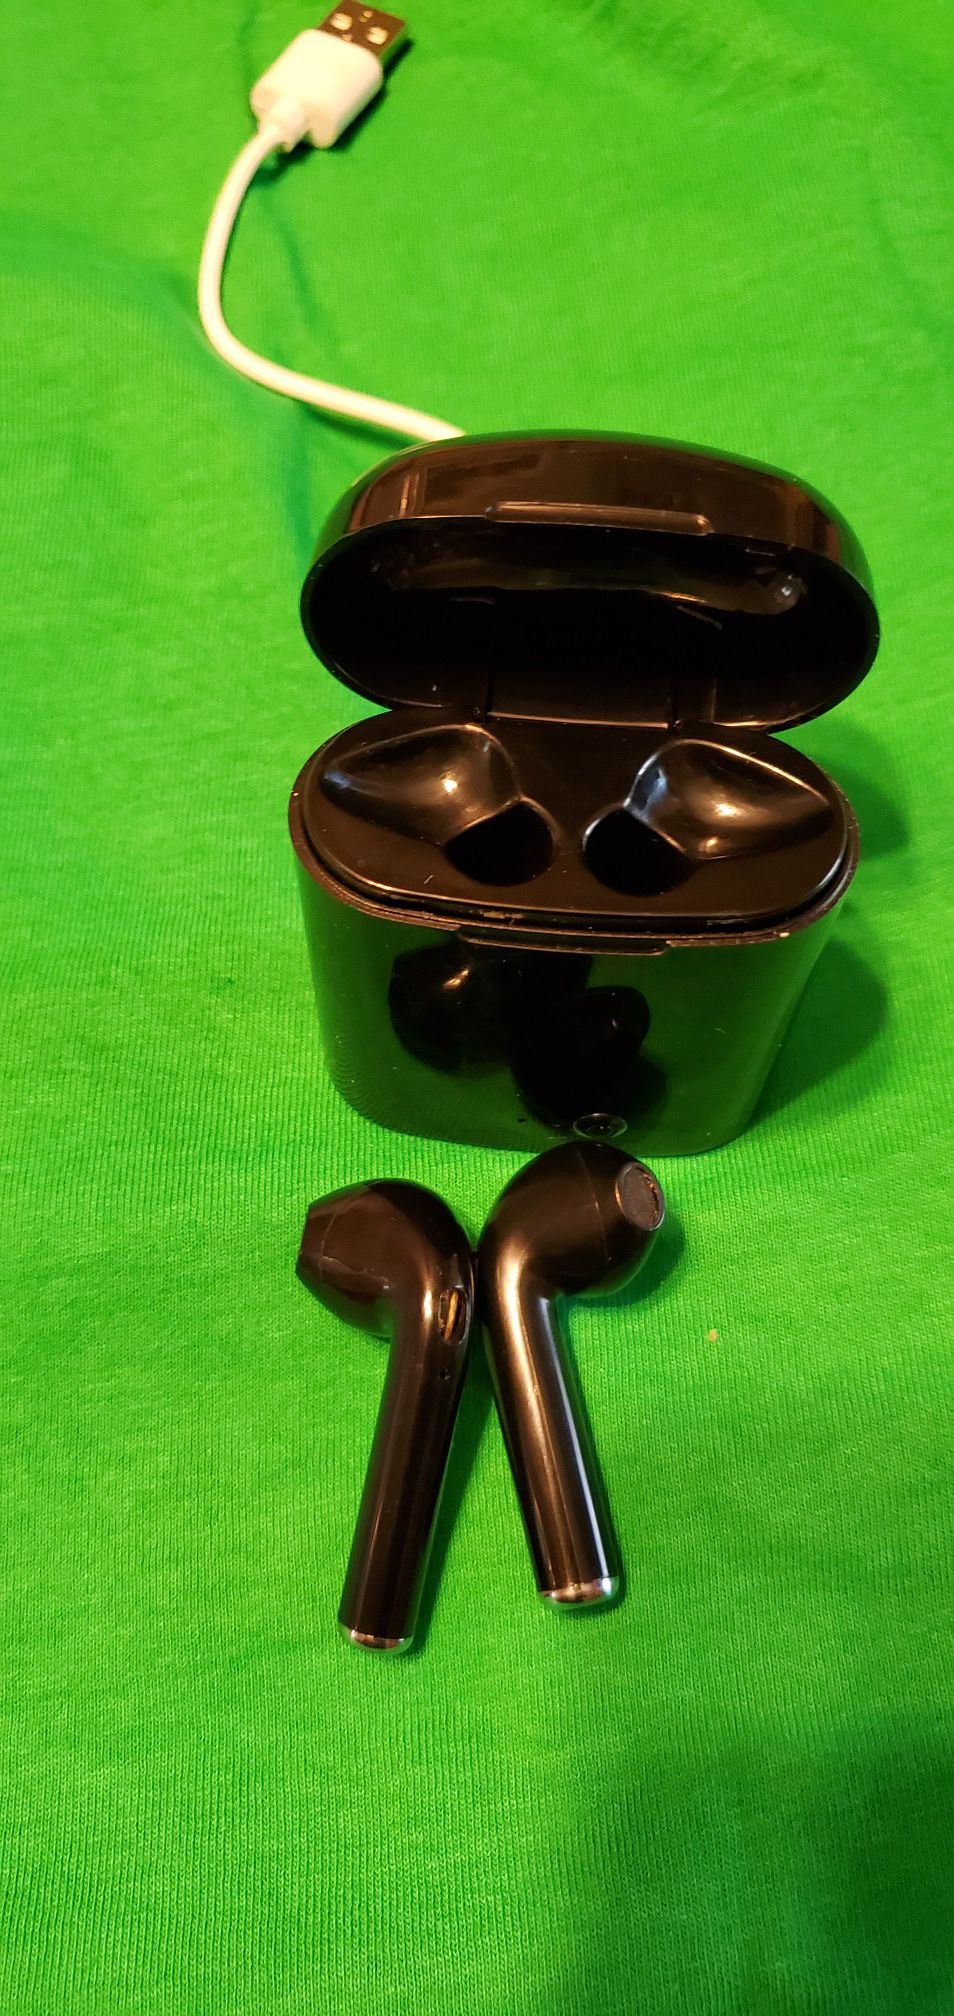 Wireless earbuds with charging case and cord